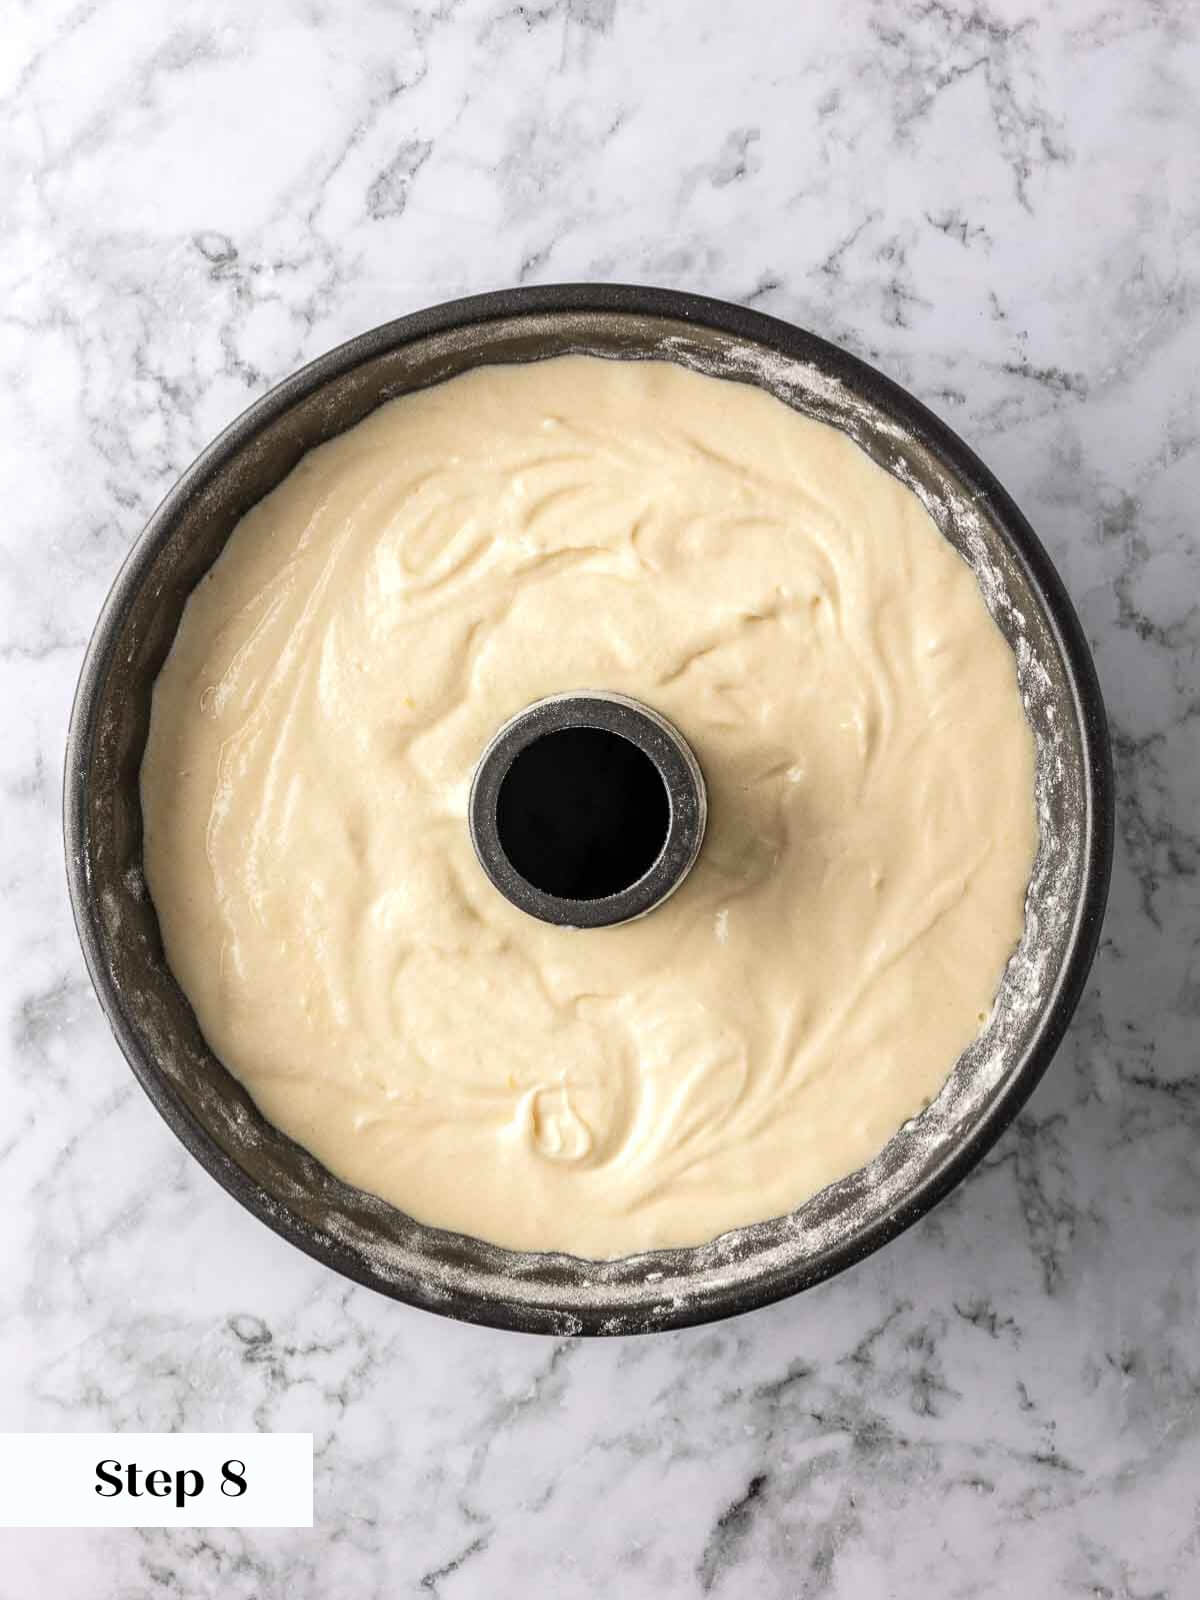 Lemon pound cake batter in a baking pan, ready for the oven.